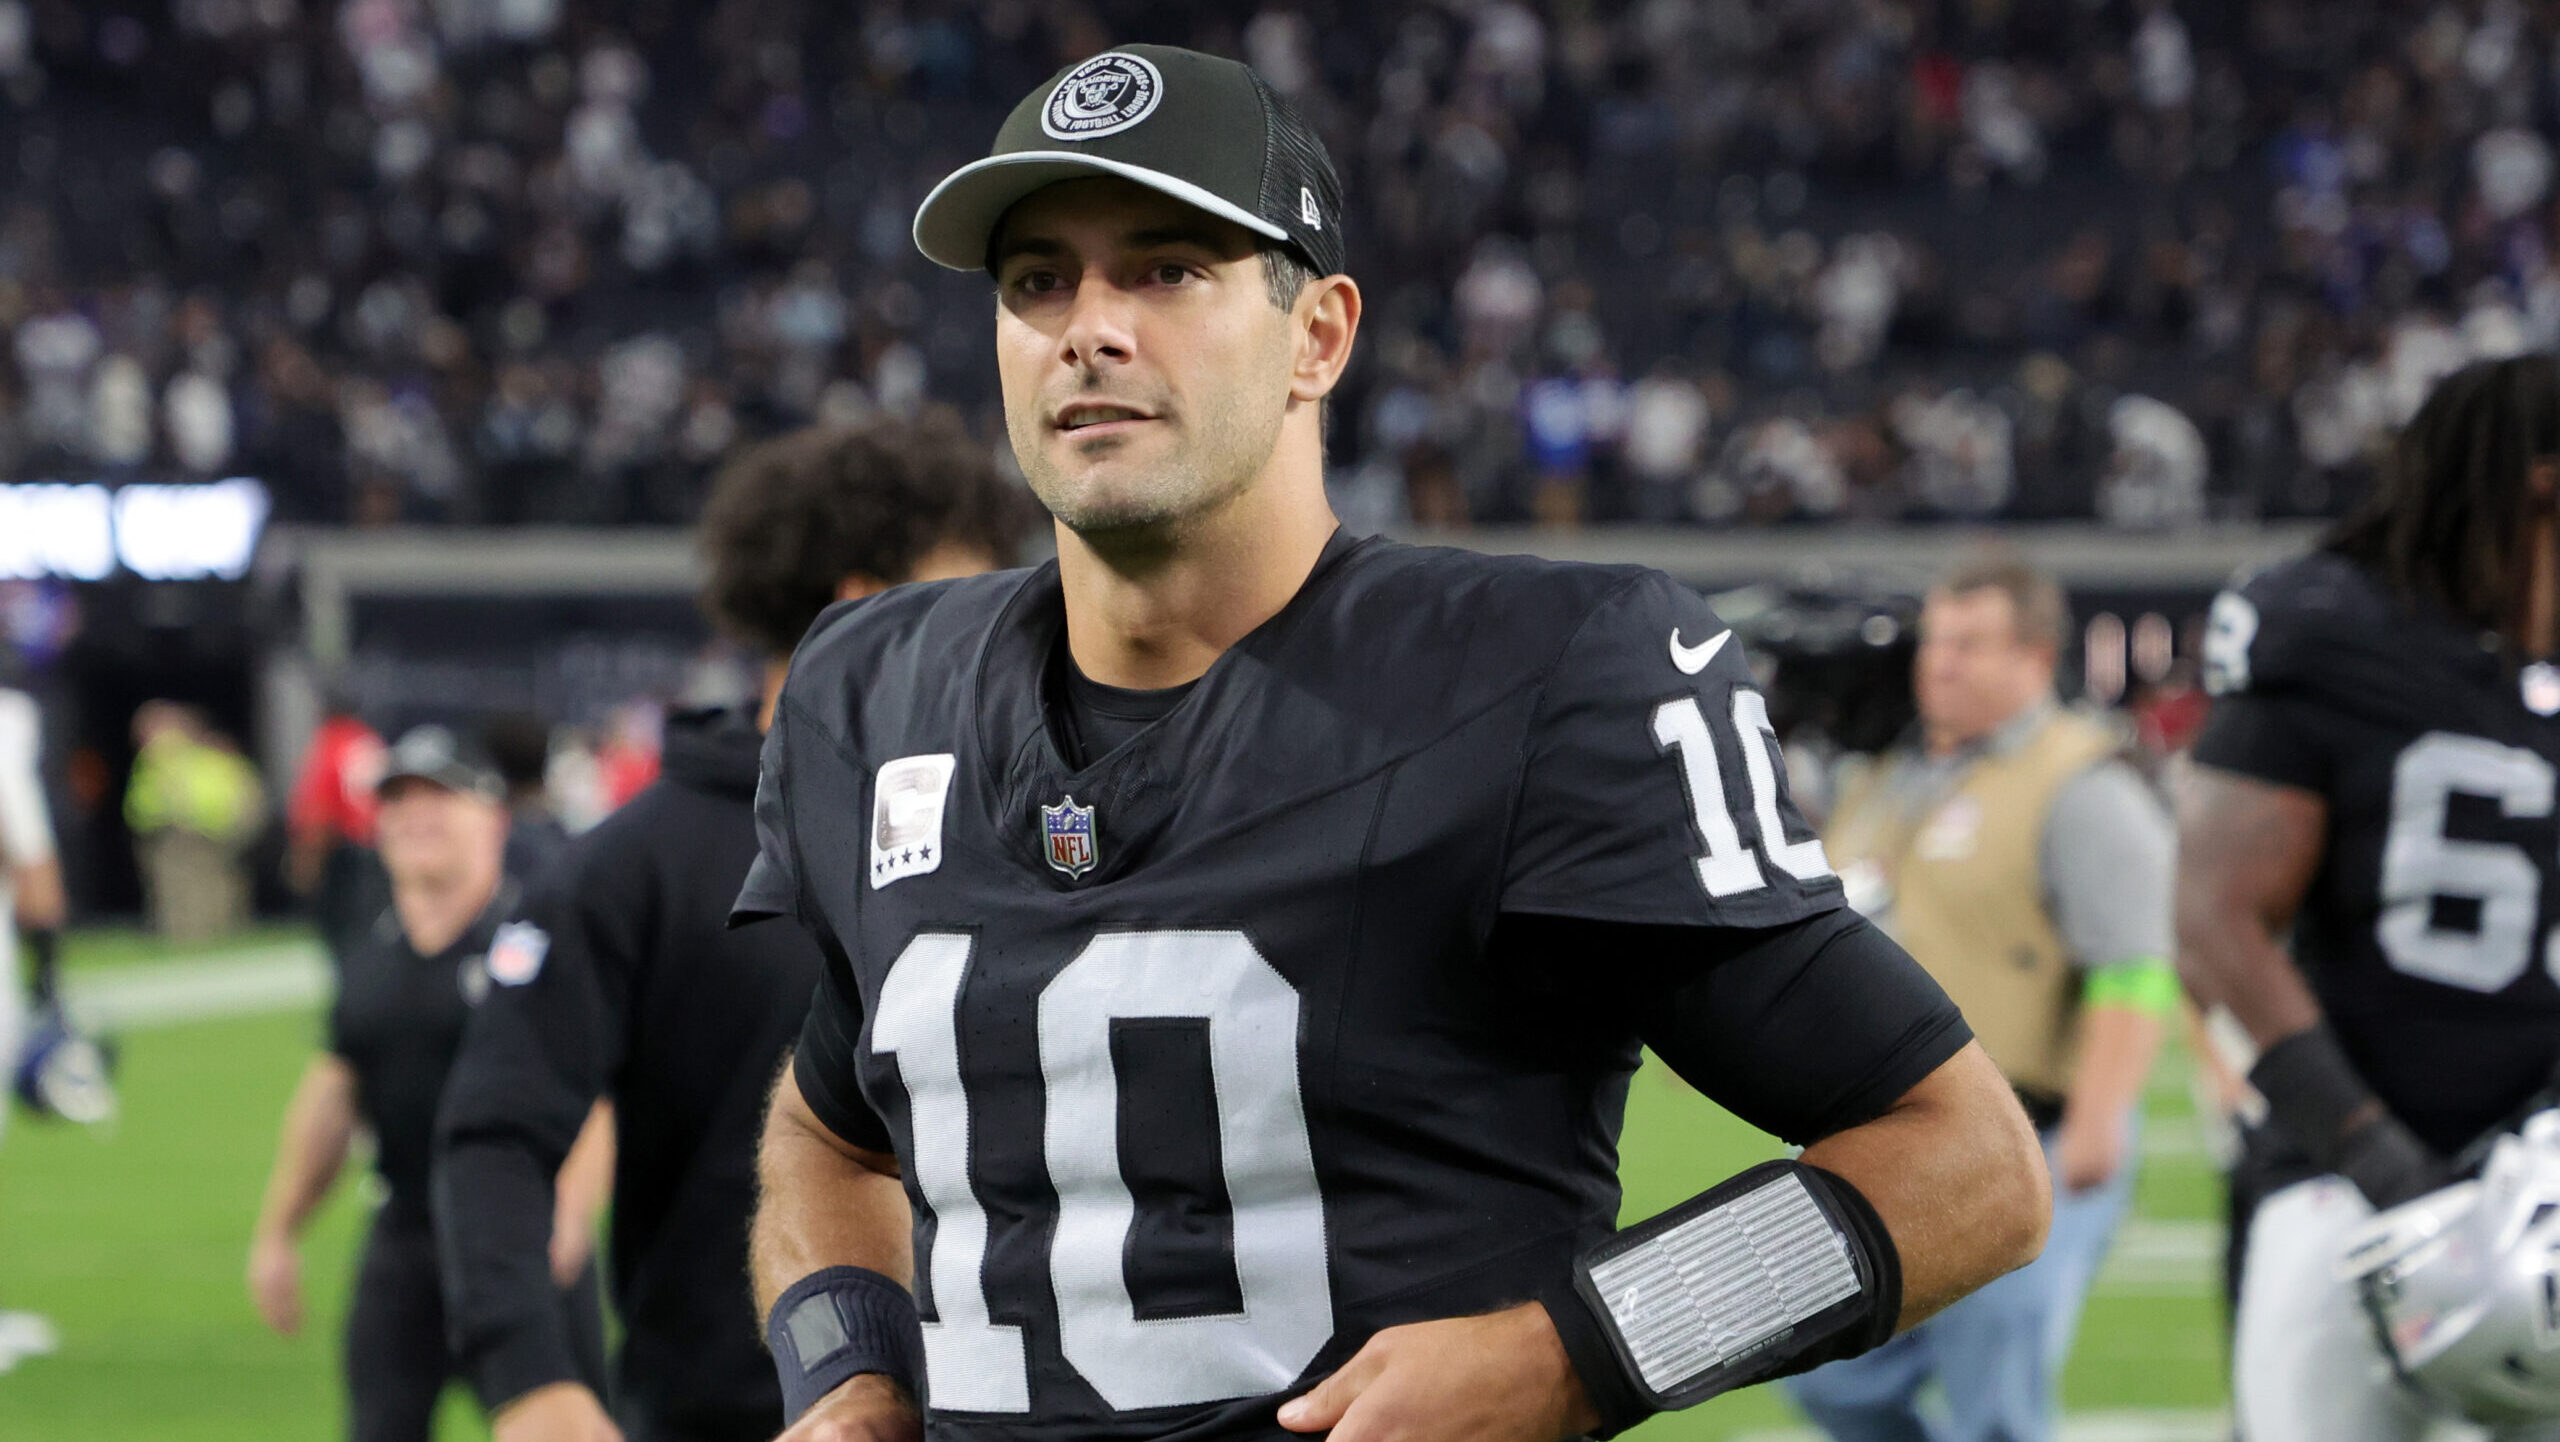 Raiders Release Jimmy Garoppolo And Hunter Renfrow In Cost-Cutting Moves